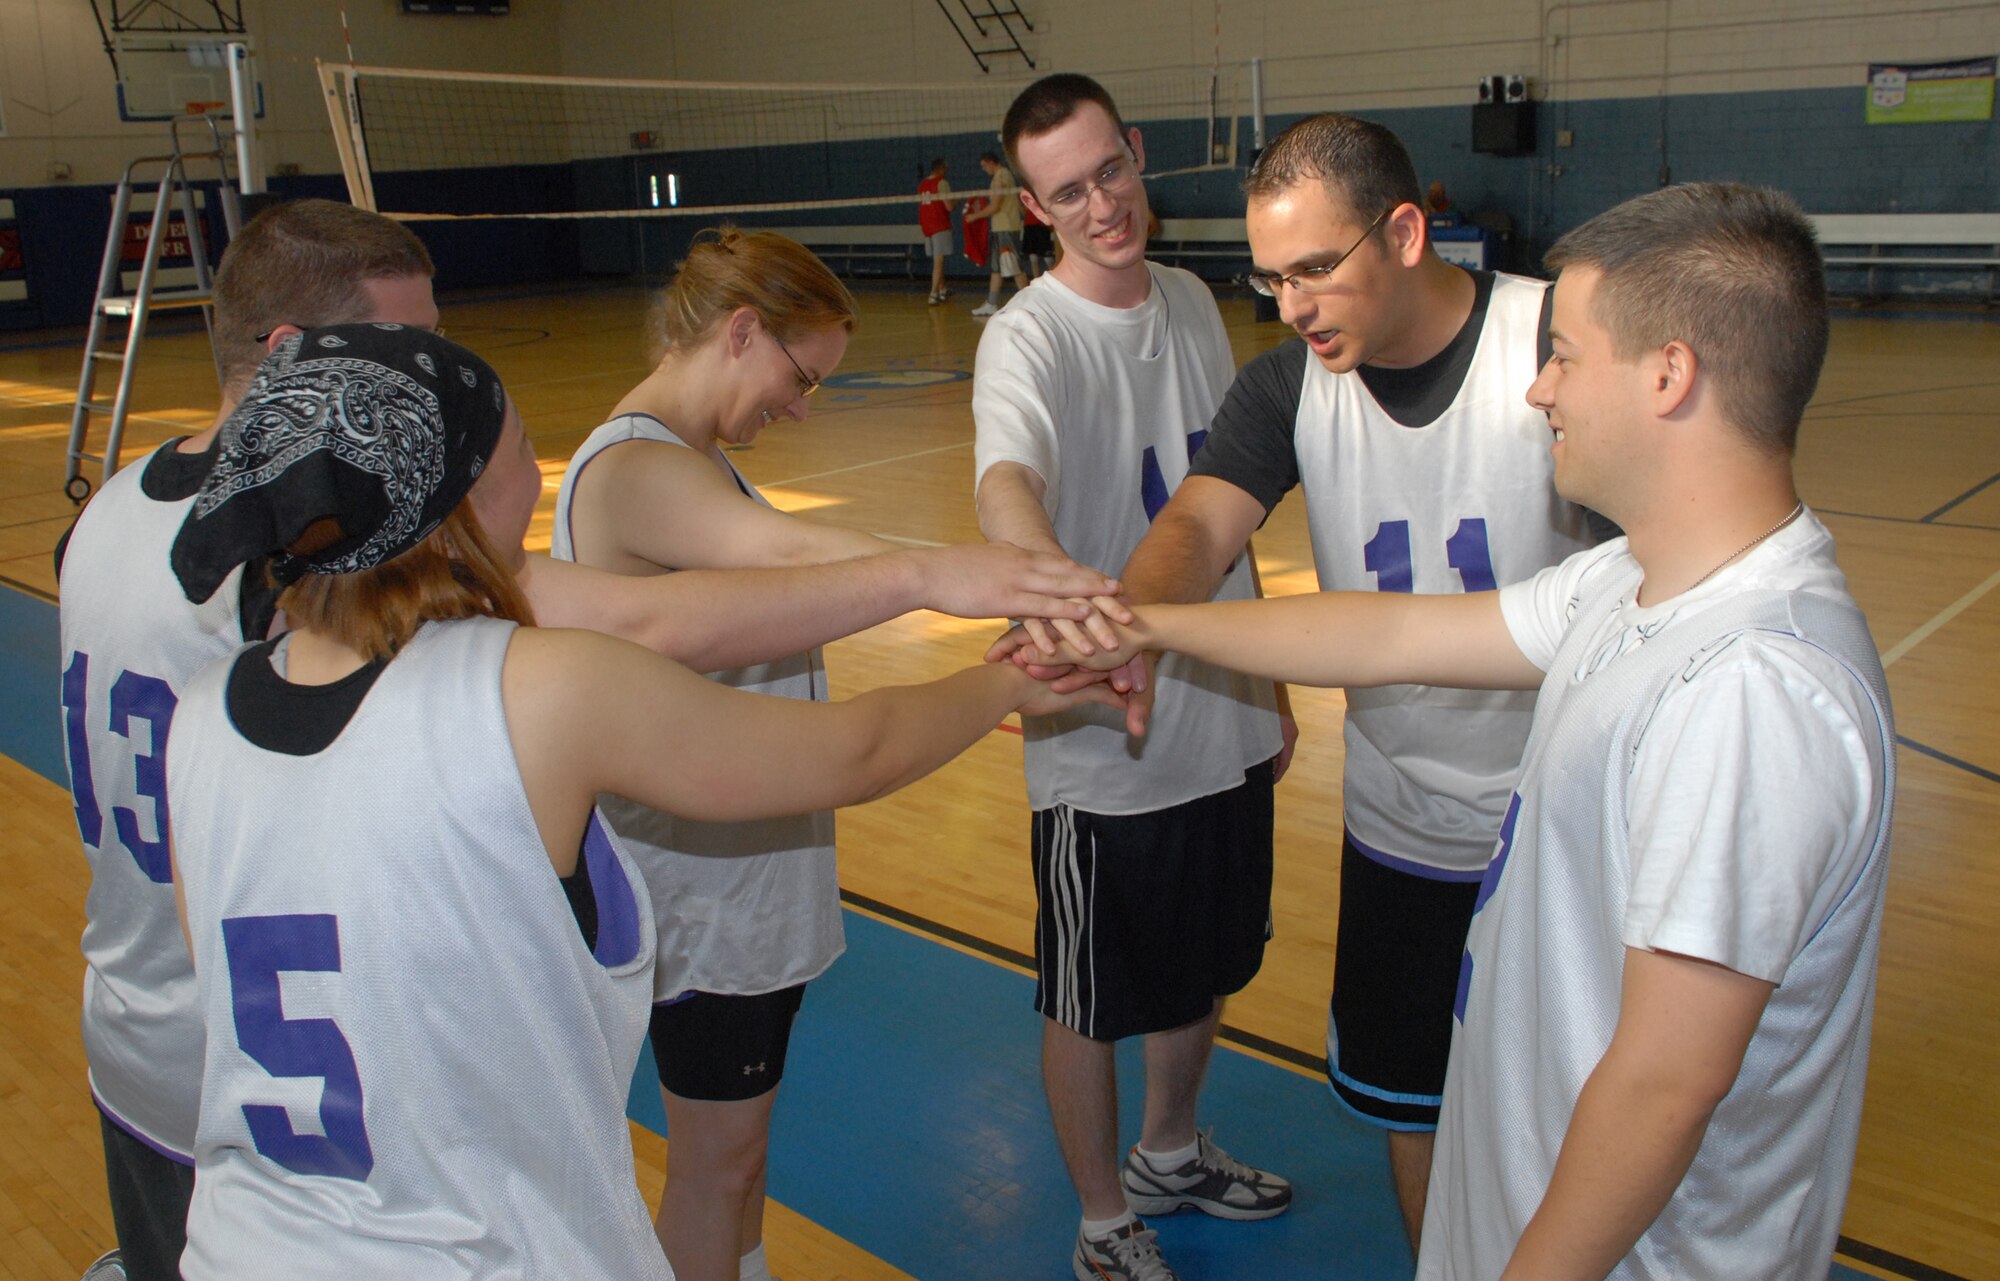 The 436th Maintenance Operations Squadron team huddles together with a game plan before their volleyball match May 4 at the Fitness Center. (U.S. Air Force photo/Airman 1st Class Shen-Chia Chu)